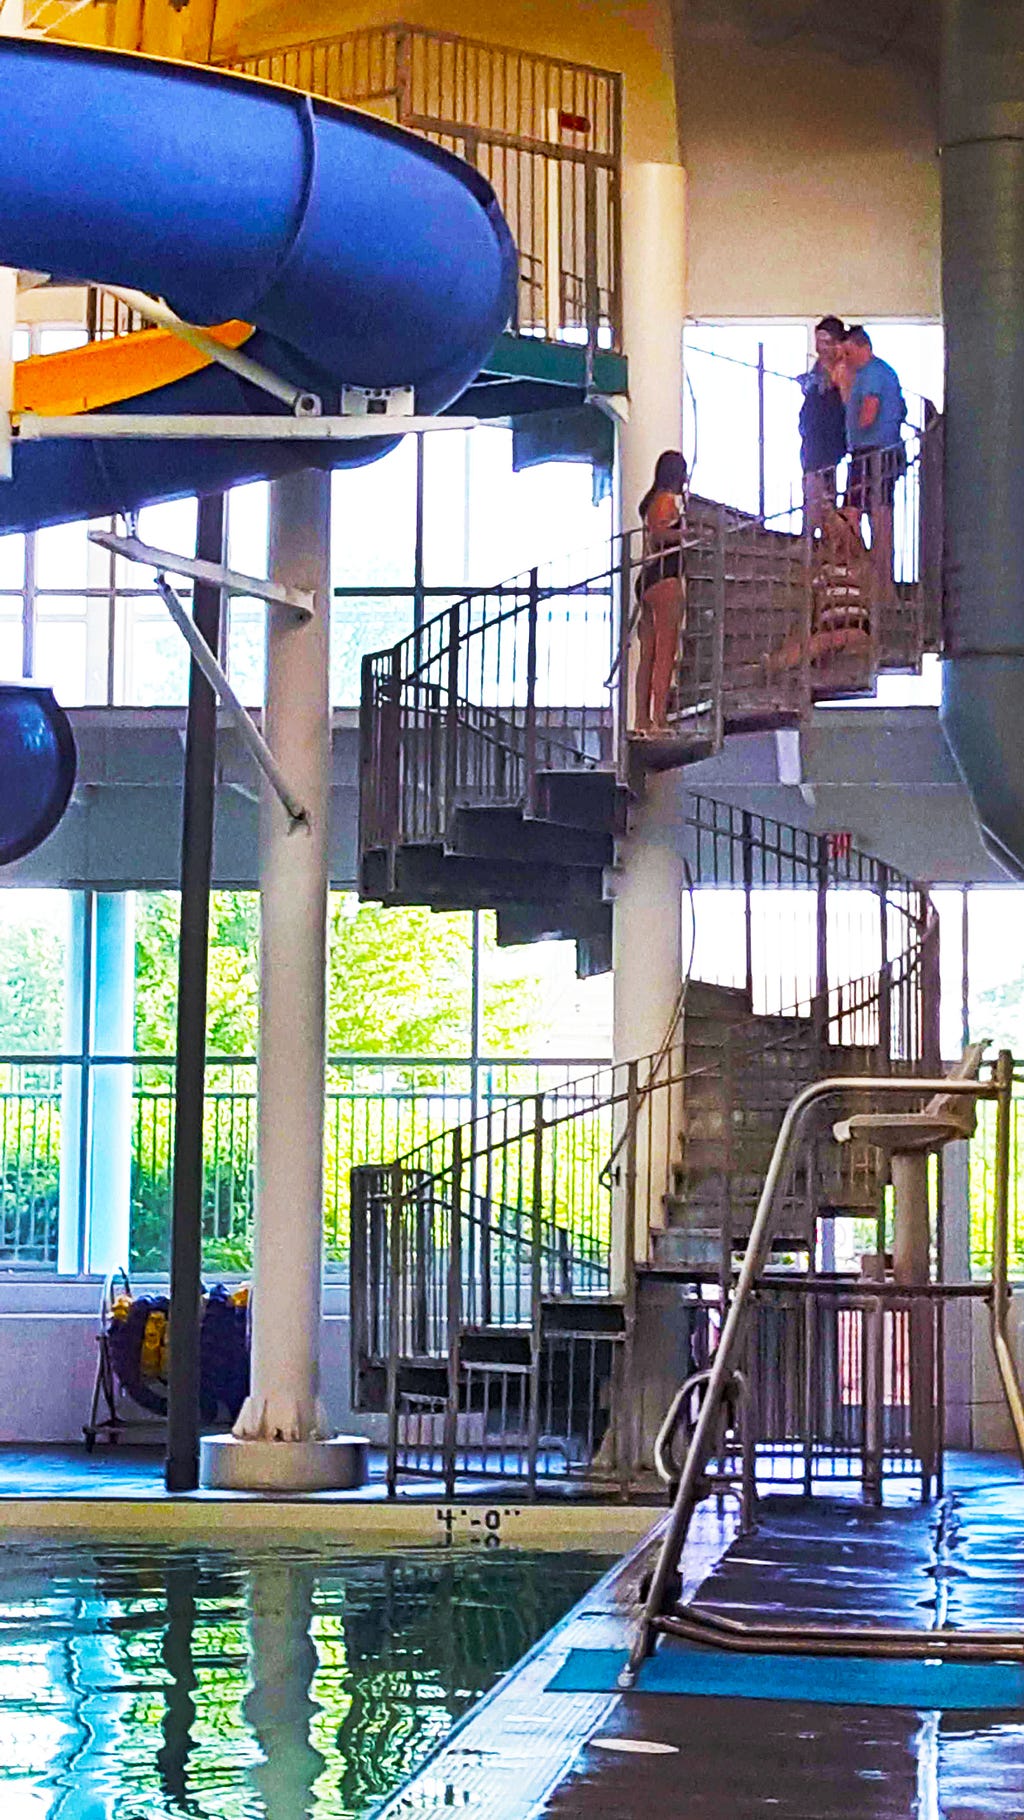 Spiral staircase one story tall leading to a waterslide. Girl is sitting on steps pulling herself up them. 3 friends nearby.